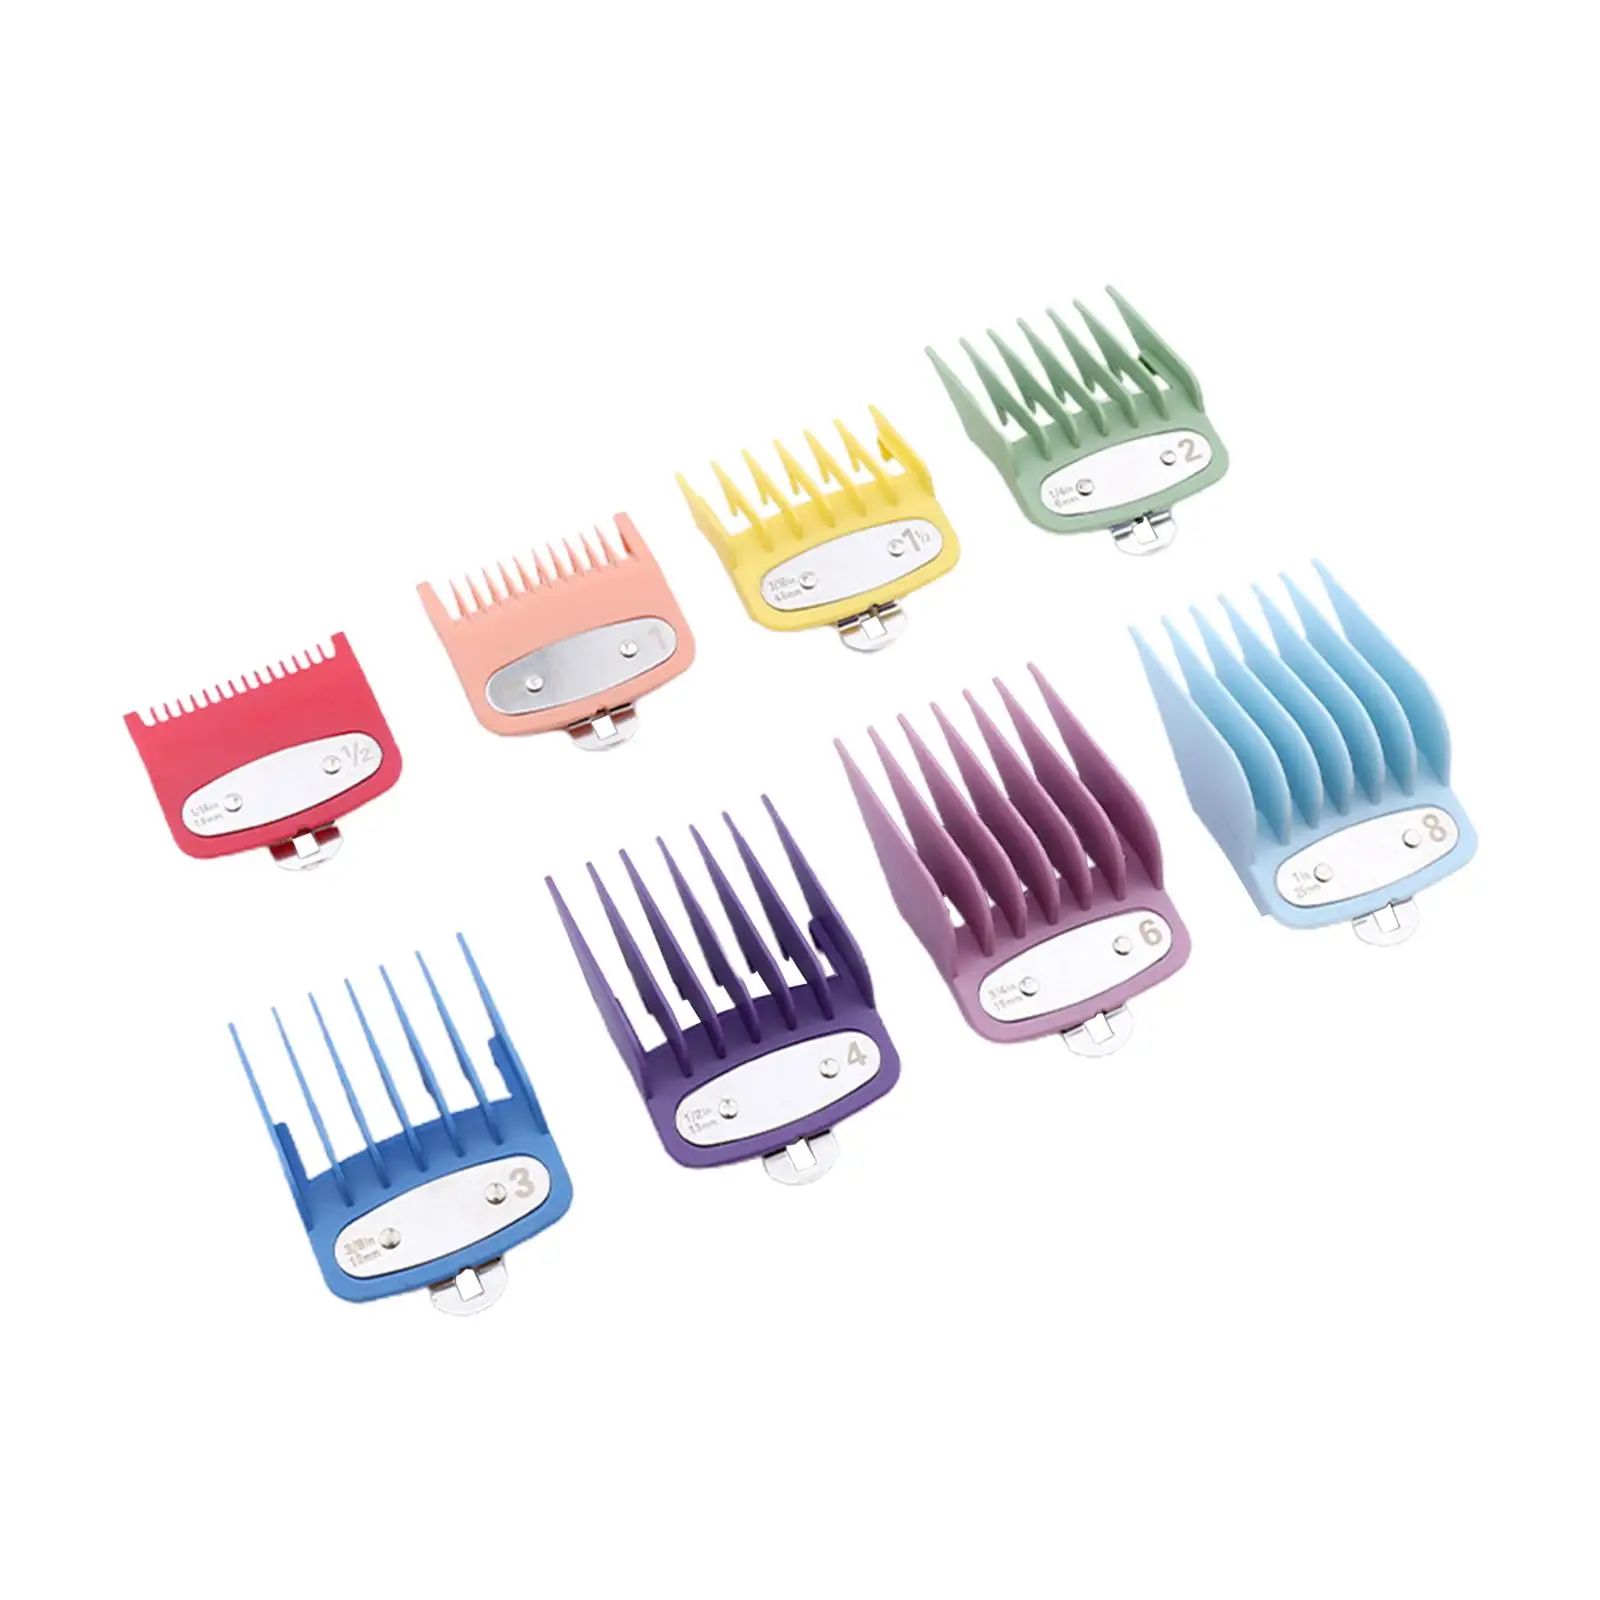 8 Pieces Hair , Attachment from 1/16 inch Metal Clip Guide Combs 